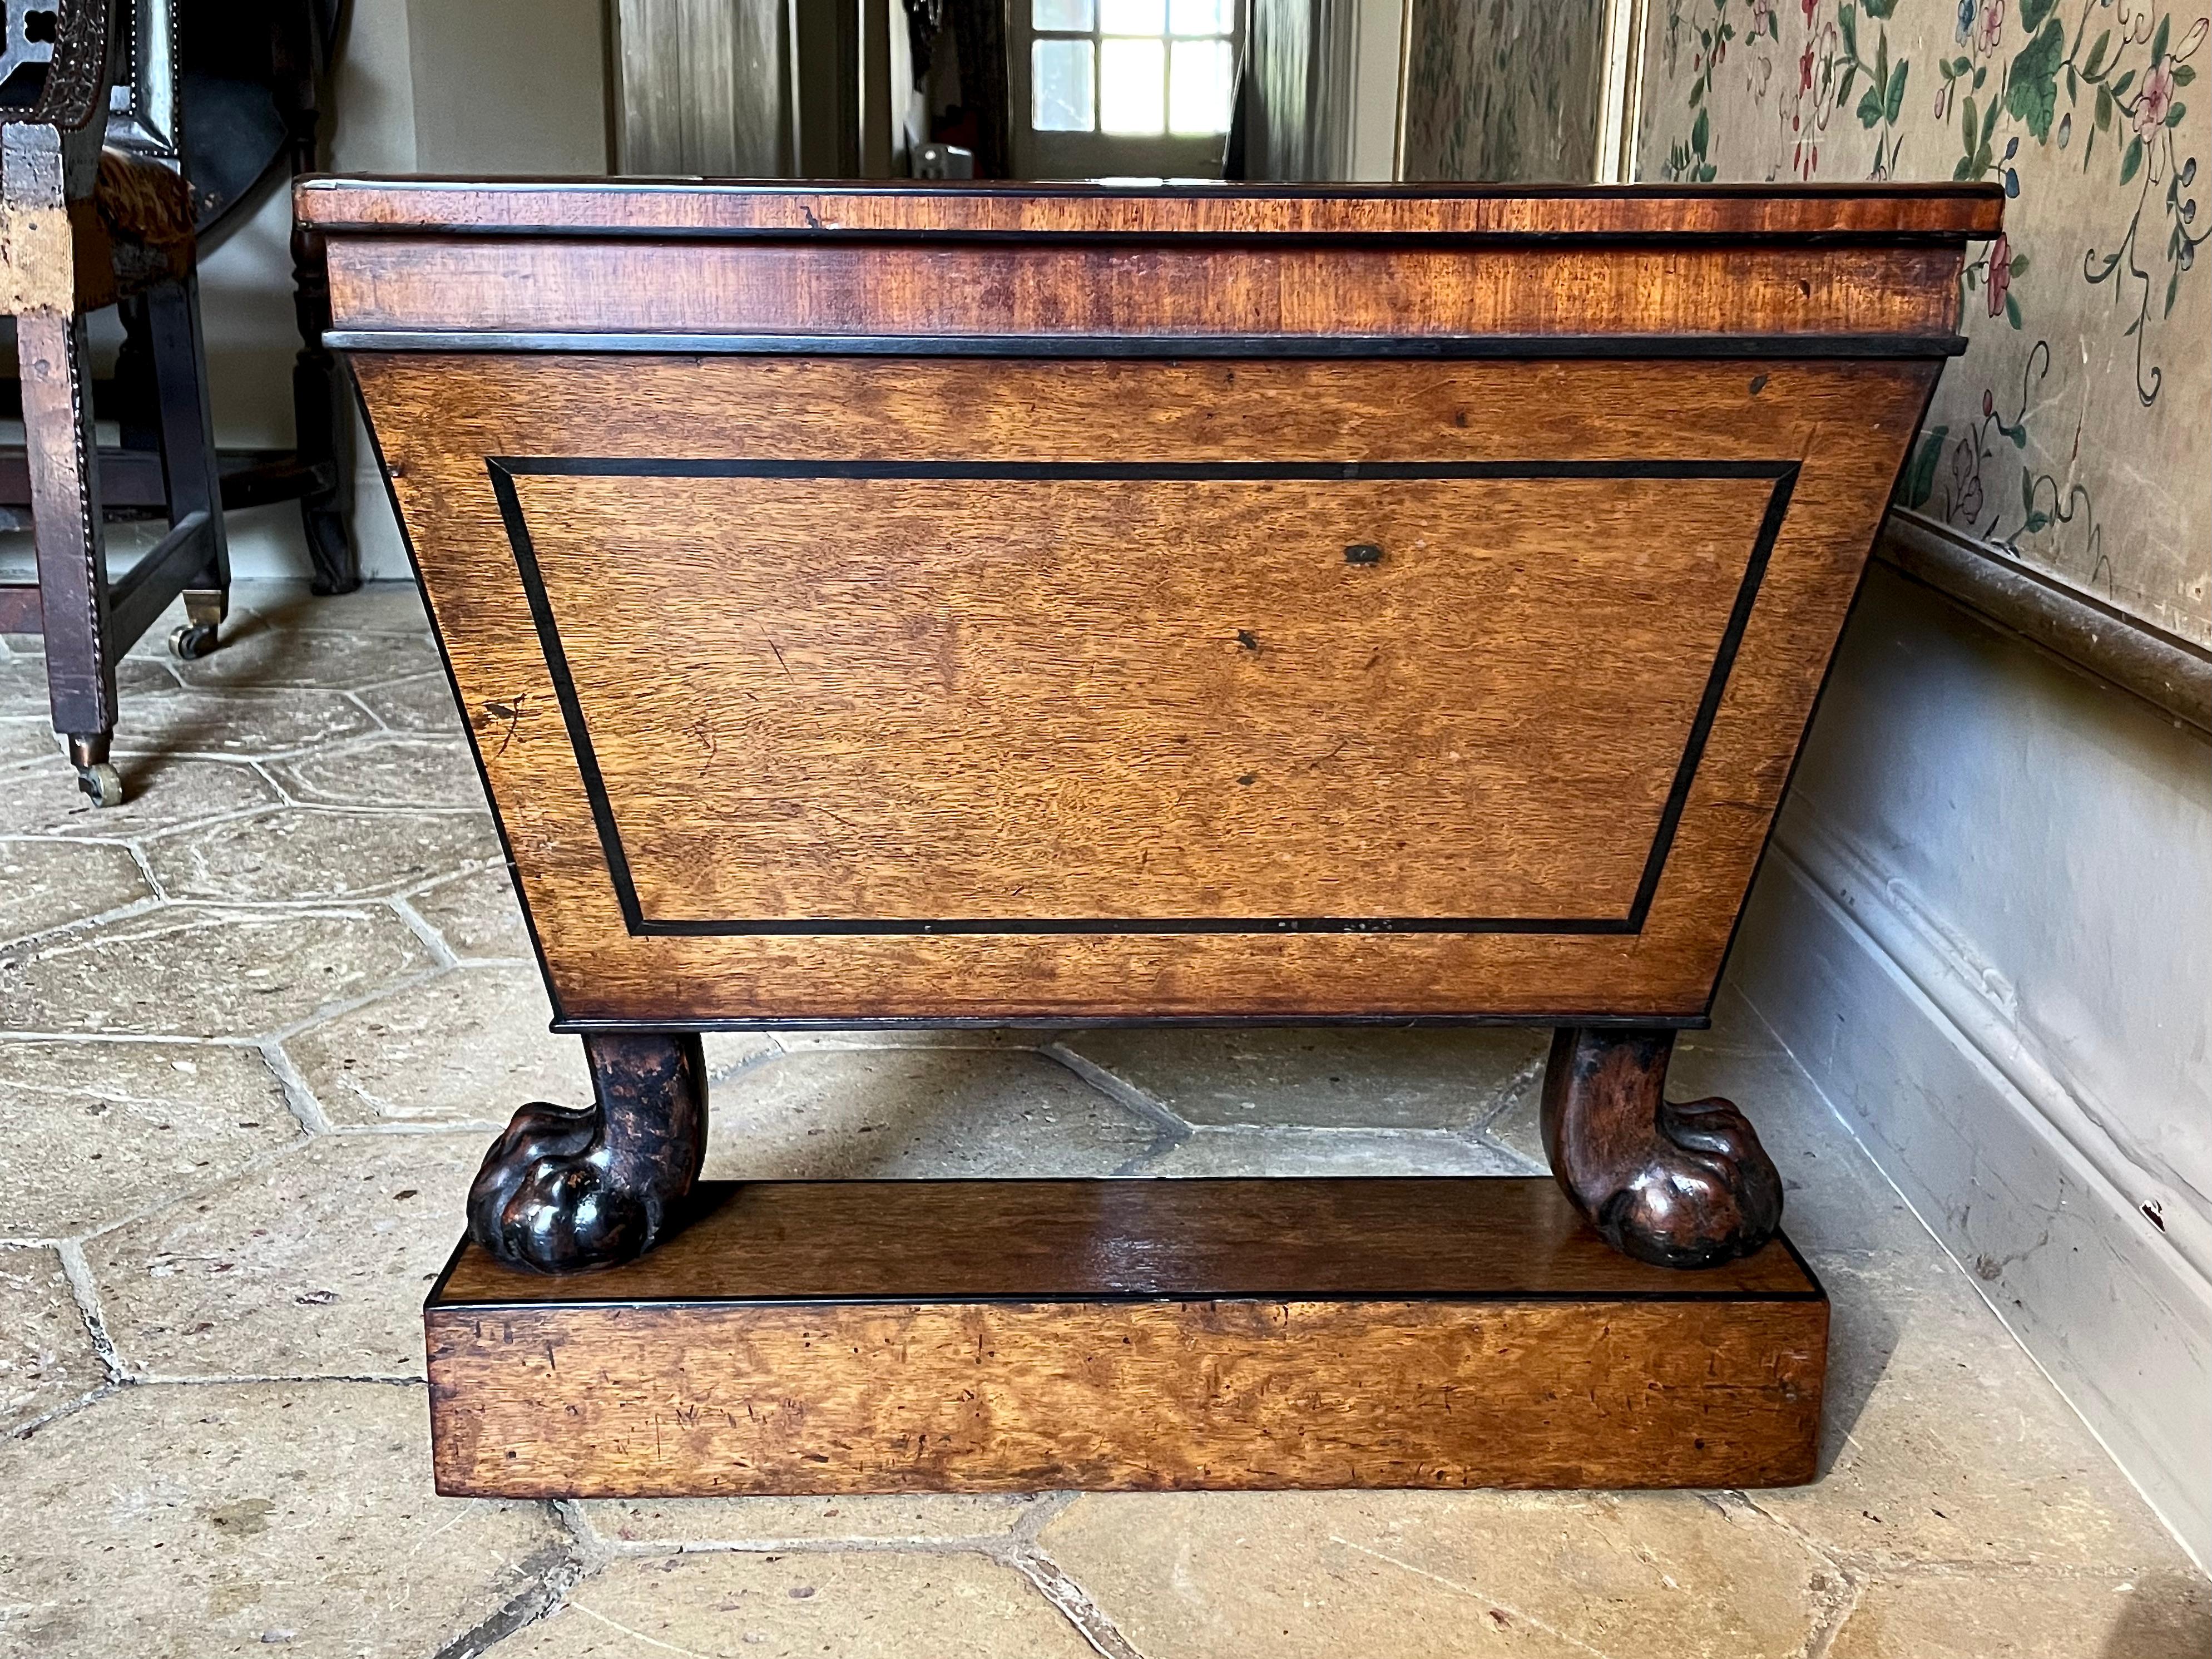 A fine and rare cellarette - or jardinière - attributed to Thomas Hope, ca 1810.

In the best quality mahogany with ebony lines and raised on well-carved animal paw feet. Original zinc liner and removable zinc tray insert. Raised on twin plinths